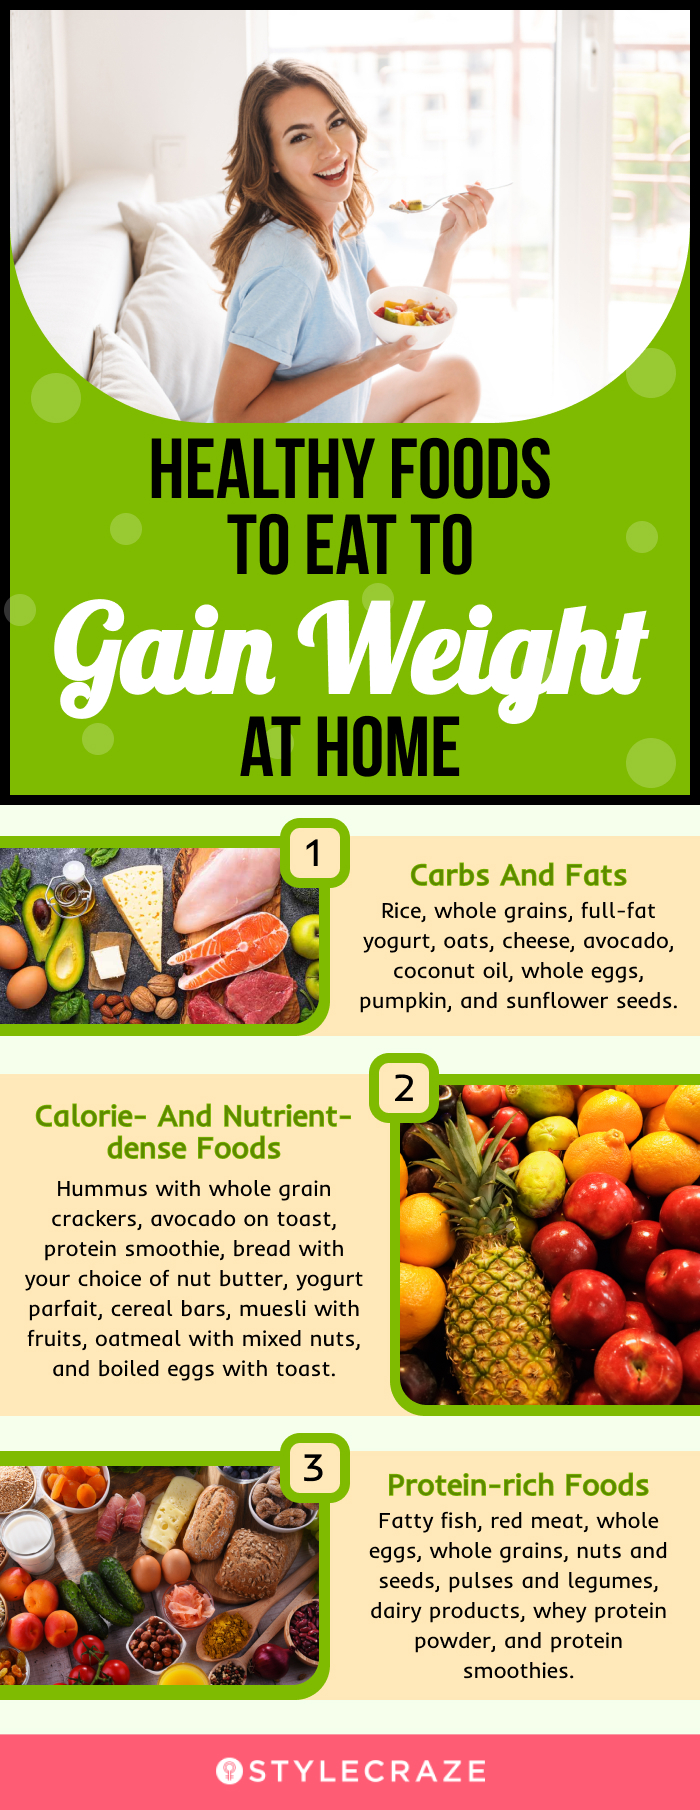 healthy foods to eat to gain weight at home (infographic)